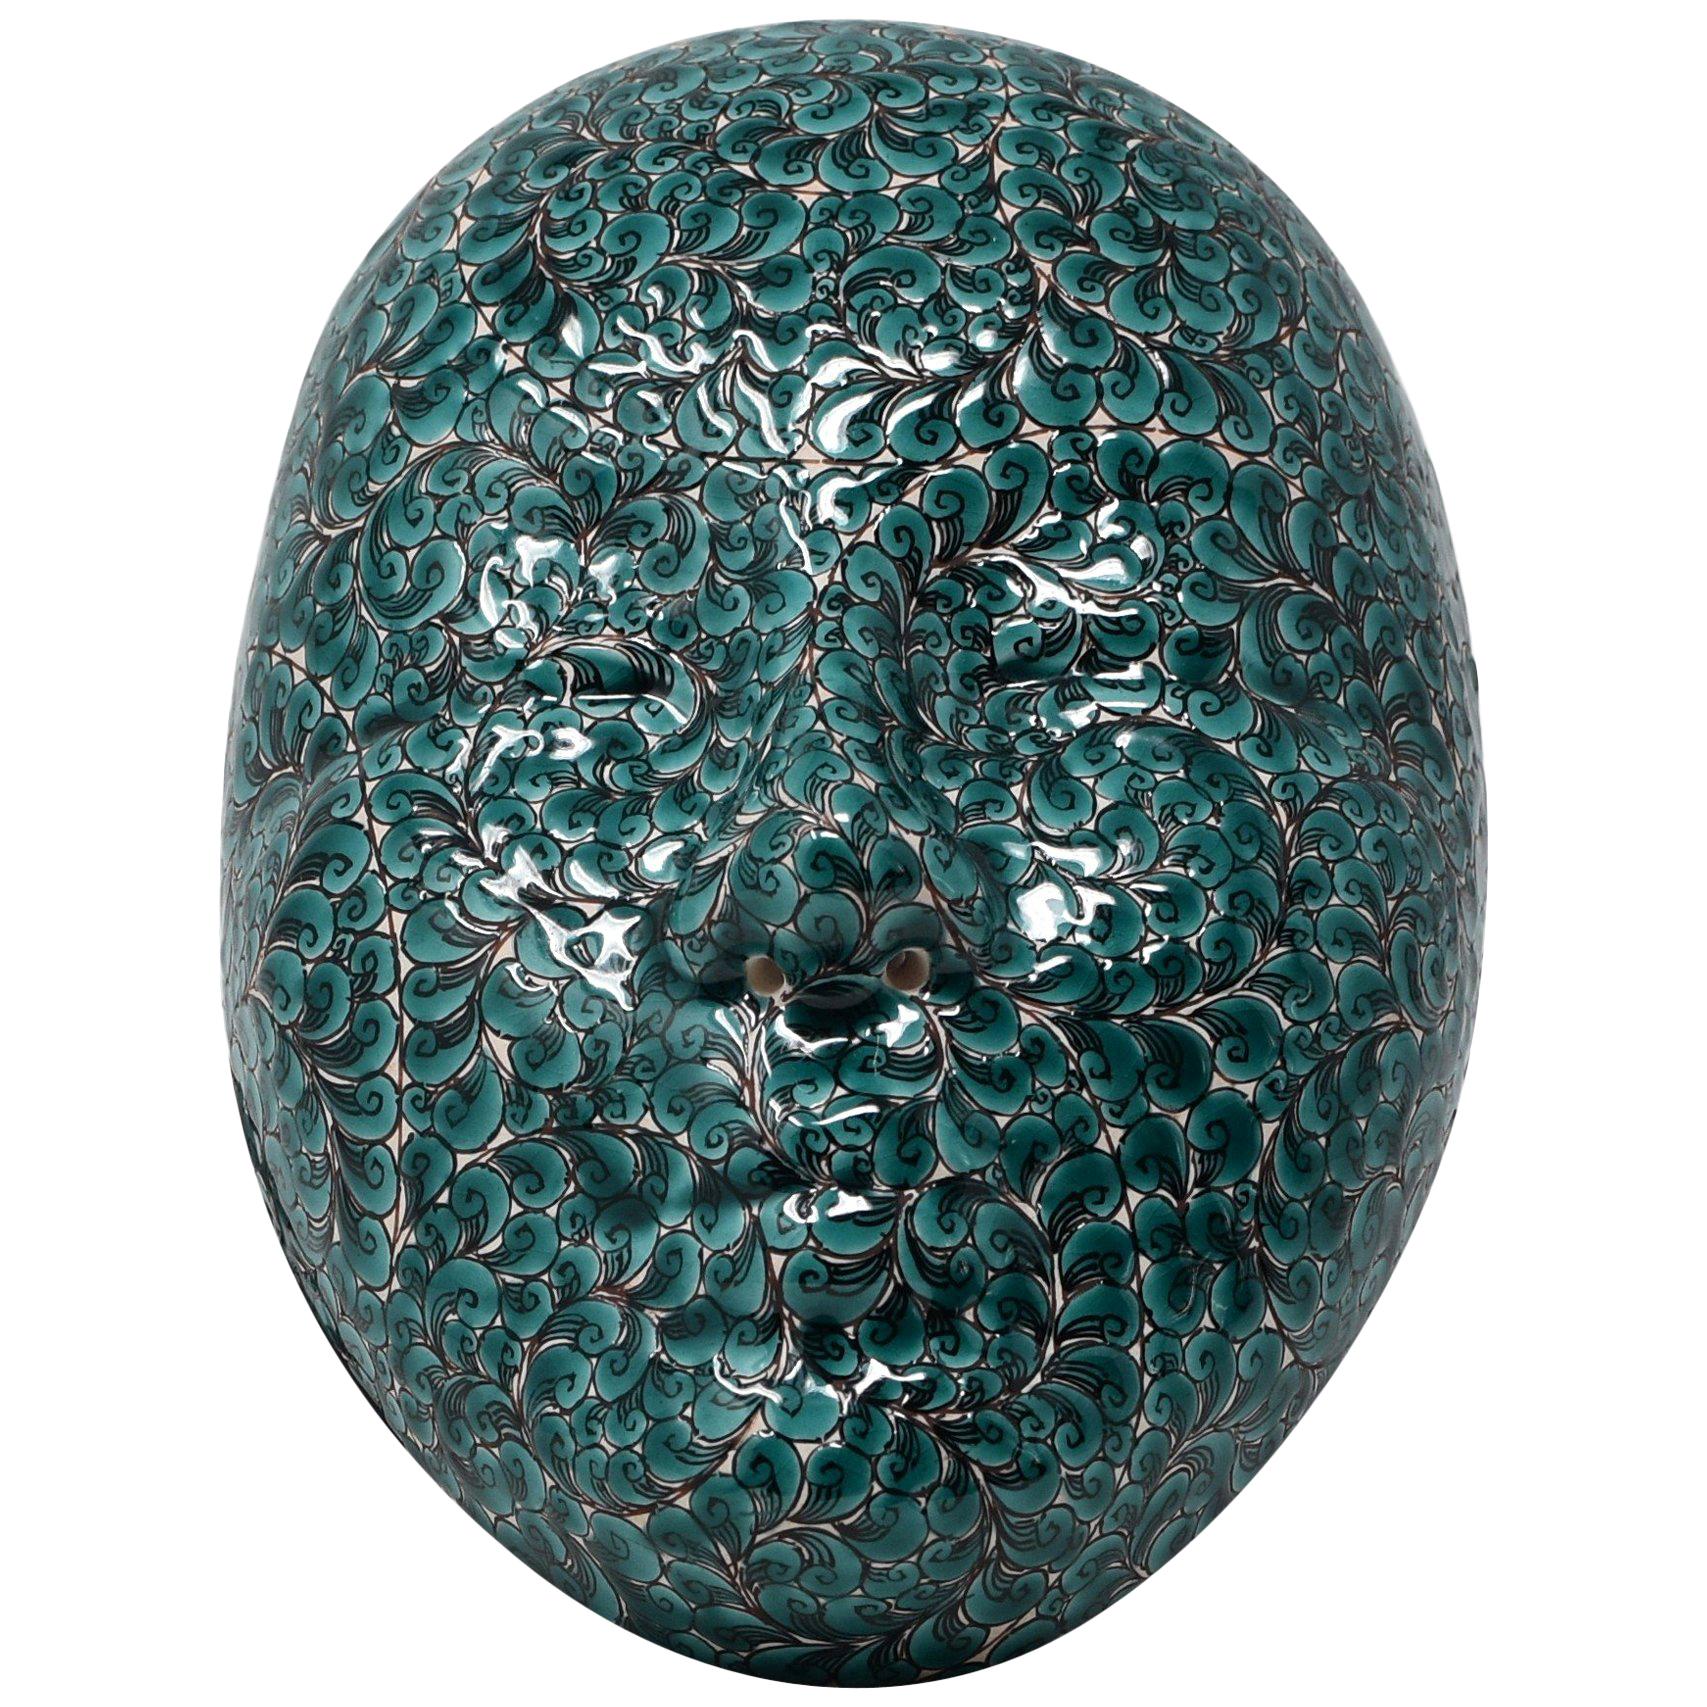 Japanese Contemporary Green Porcelain Mask by Master Artist